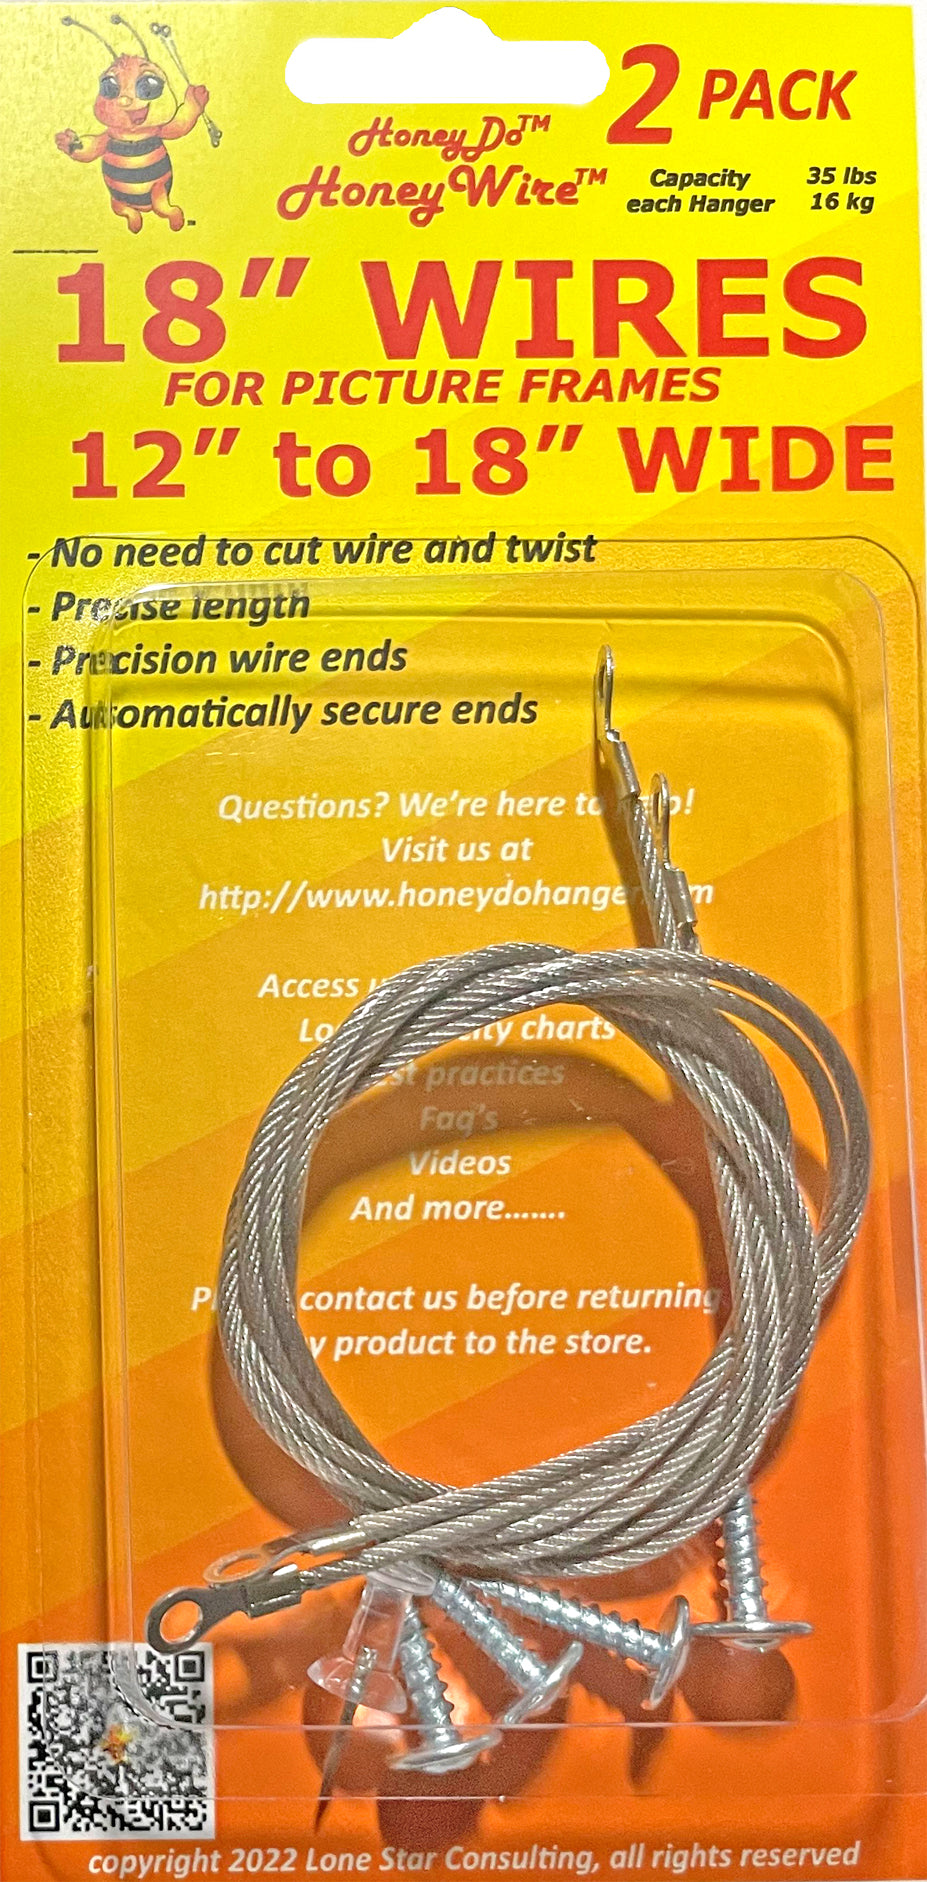 HW0218 - Standard HoneyWire 2 Pack 18 Precision Picture Hanging